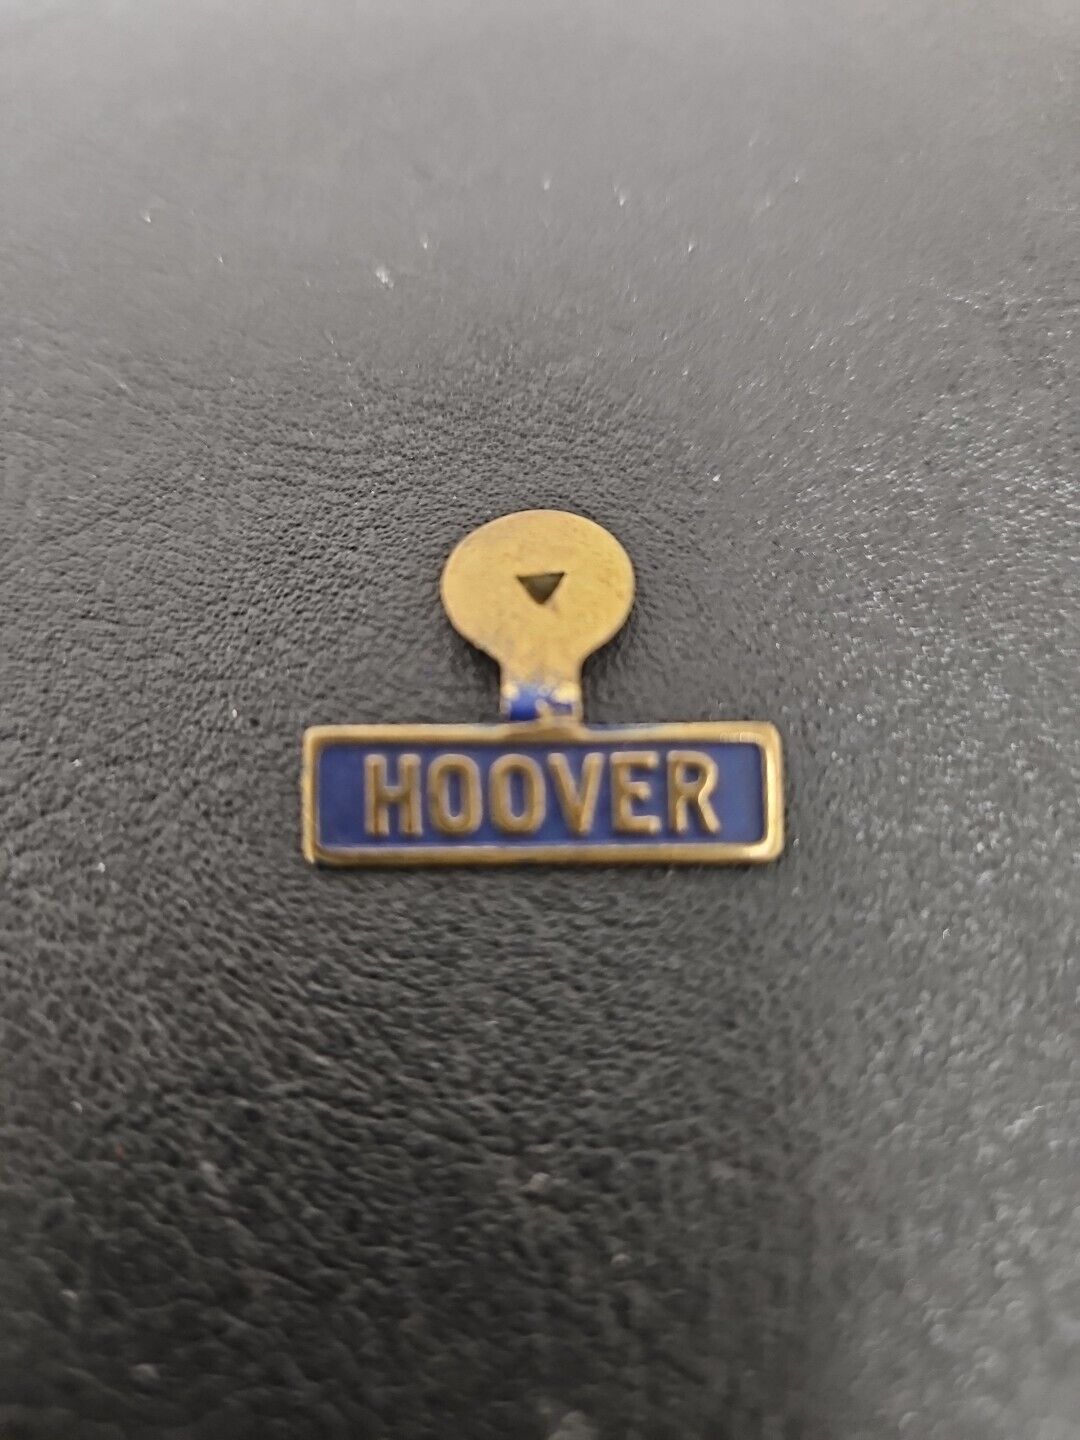 Vintage Hoover Presidential Campaign Pin Lapel Pin 1920s/1930s